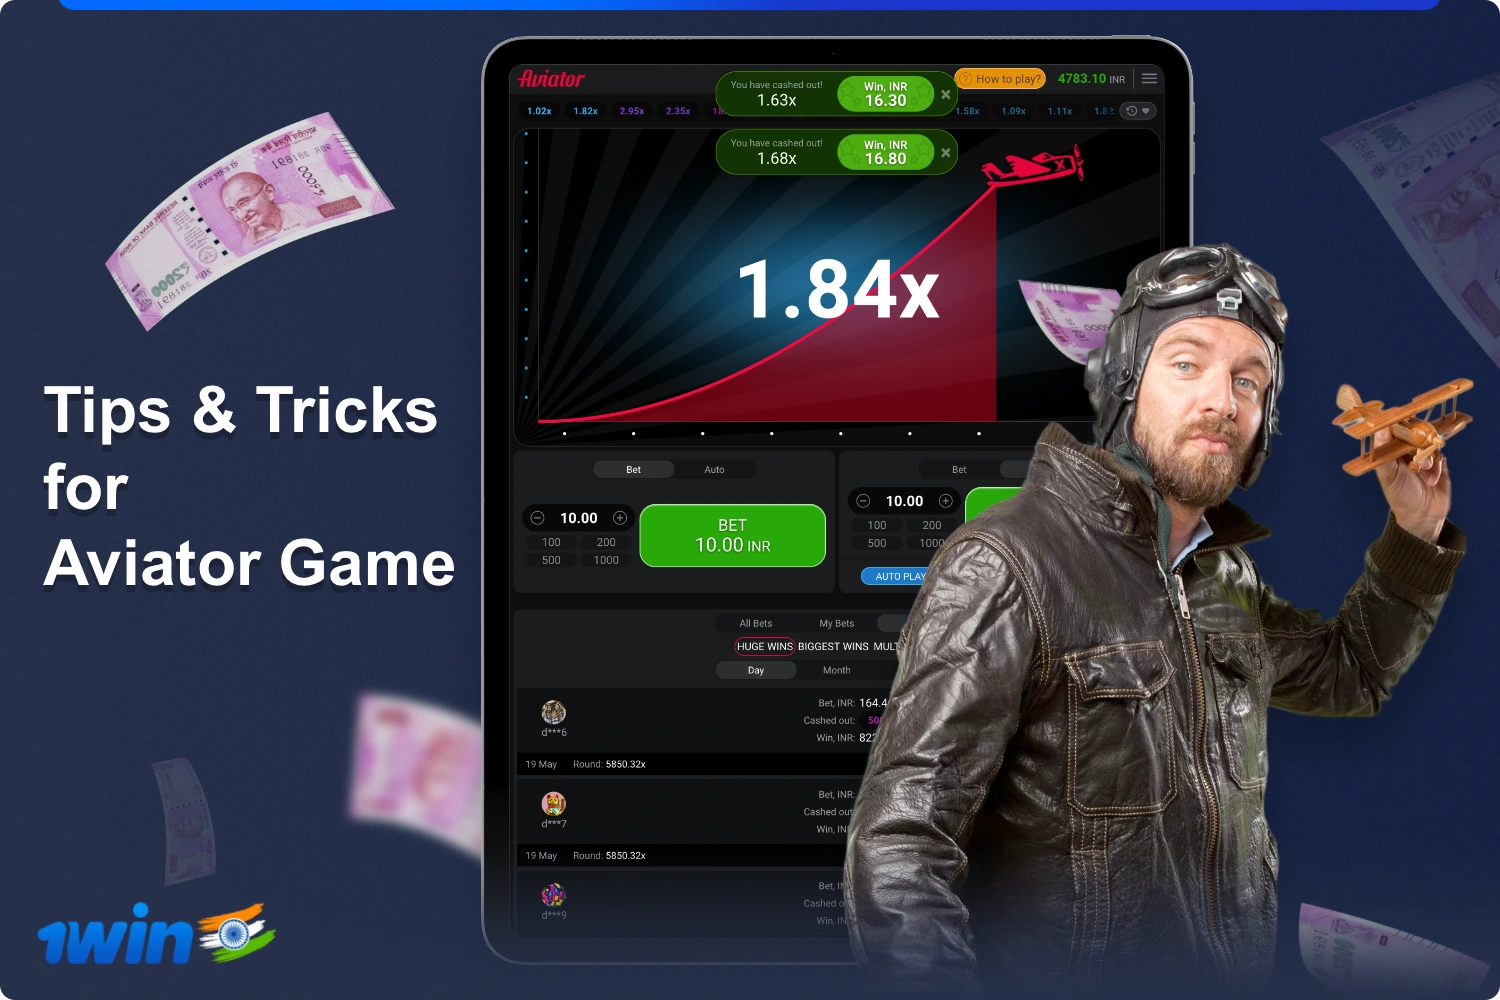 Recommended to study the tips and tricks of the game Aviator, which will help increase the chance of winning at 1win